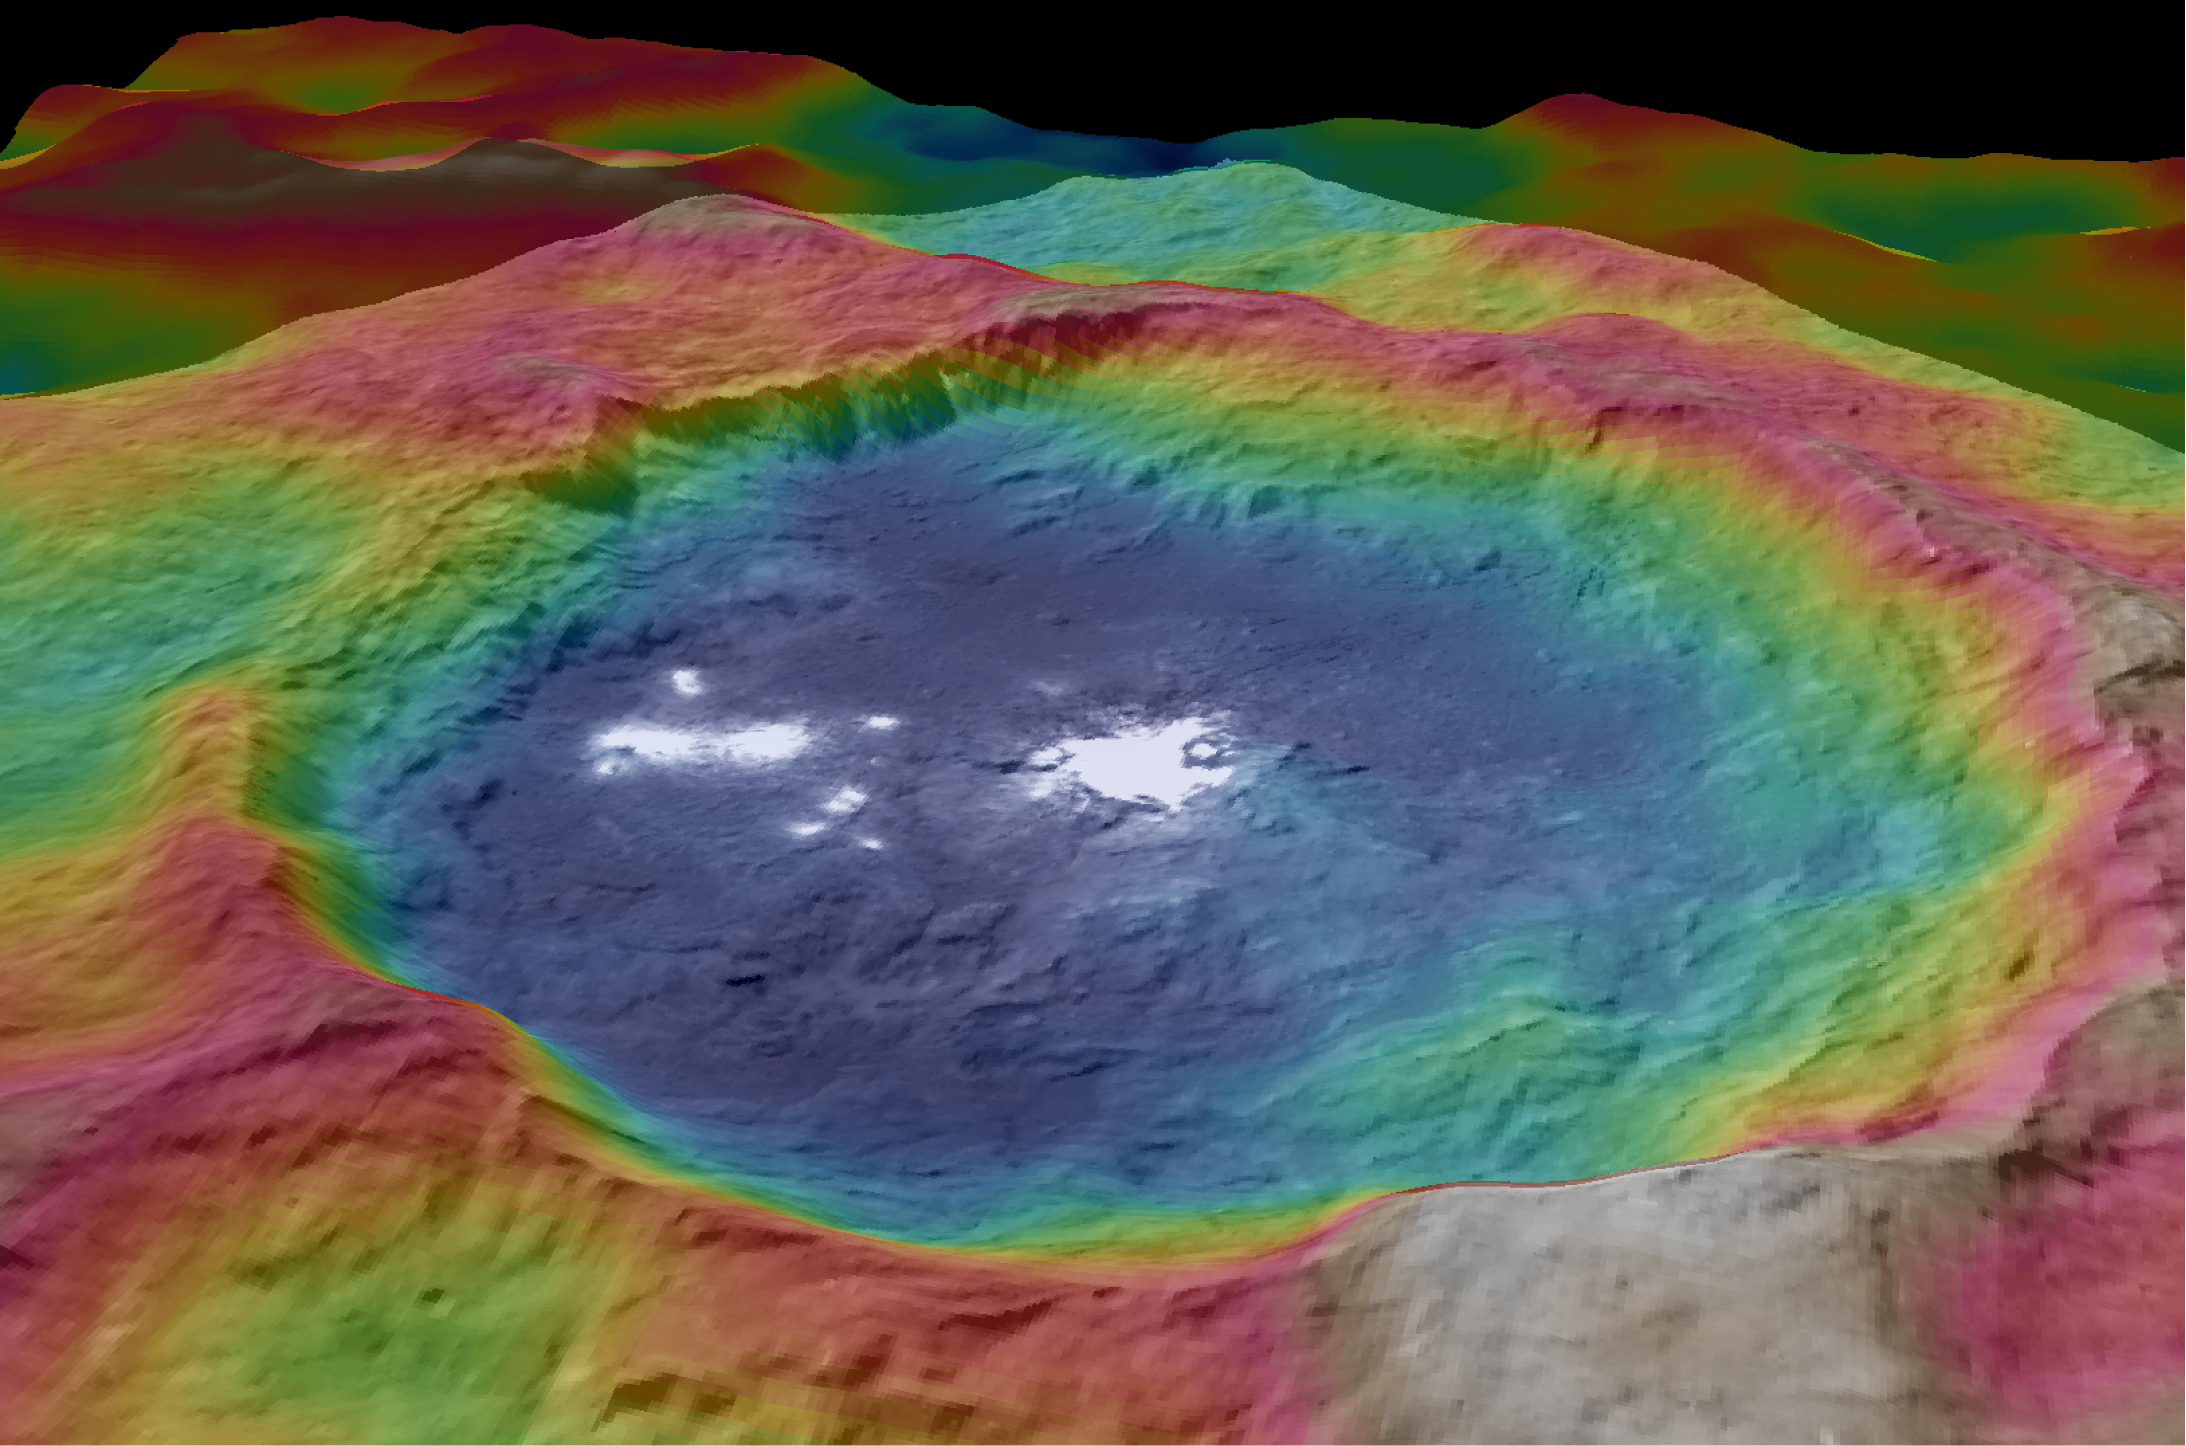 From NASA/JPL: "This view, made using images taken by NASA's Dawn spacecraft, is a color-coded topographic map of Occator crater on Ceres. Blue is the lowest elevation, and brown is the highest. The crater, which is home to the brightest spots on Ceres, is approximately 56 miles (90 kilometers wide)." Occator is home to Ceres' "bright spots." Image Credit: NASA/JPL-Caltech/UCLA/MPS/DLR/IDA